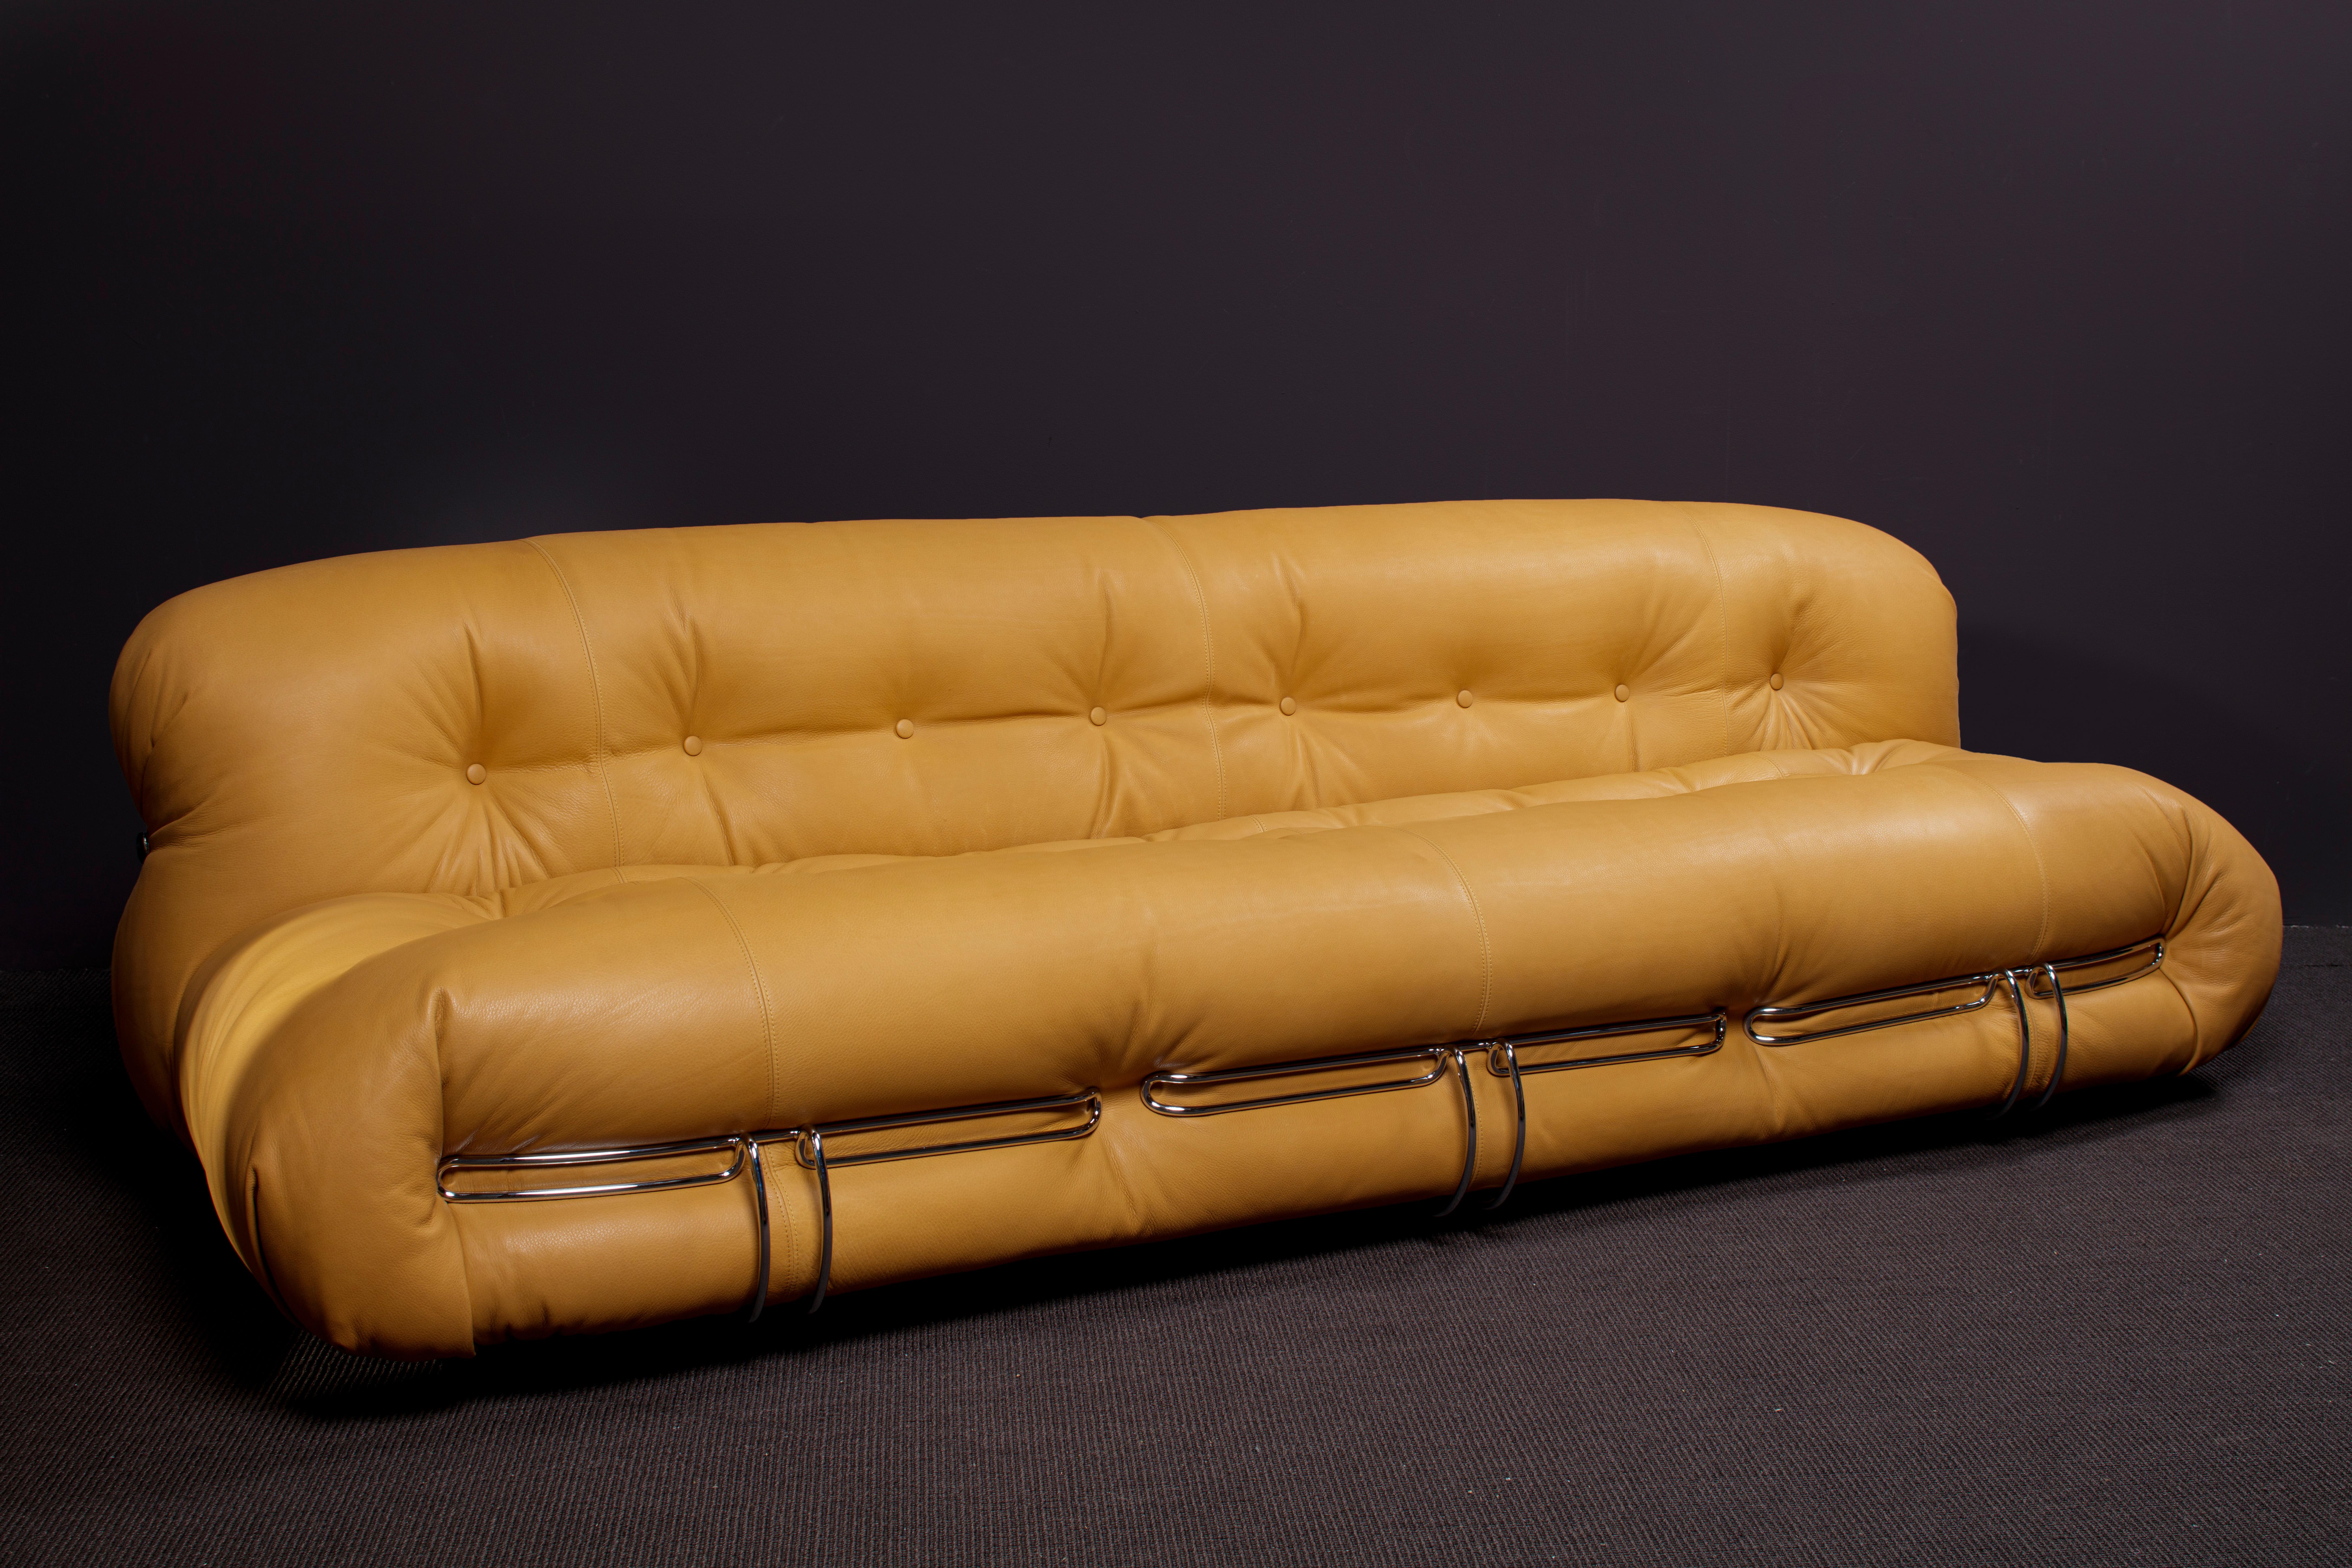 Afra & Tobia Scarpa Soriana Sofa and Ottoman in Light Tobacco Leather by Cassina For Sale 2